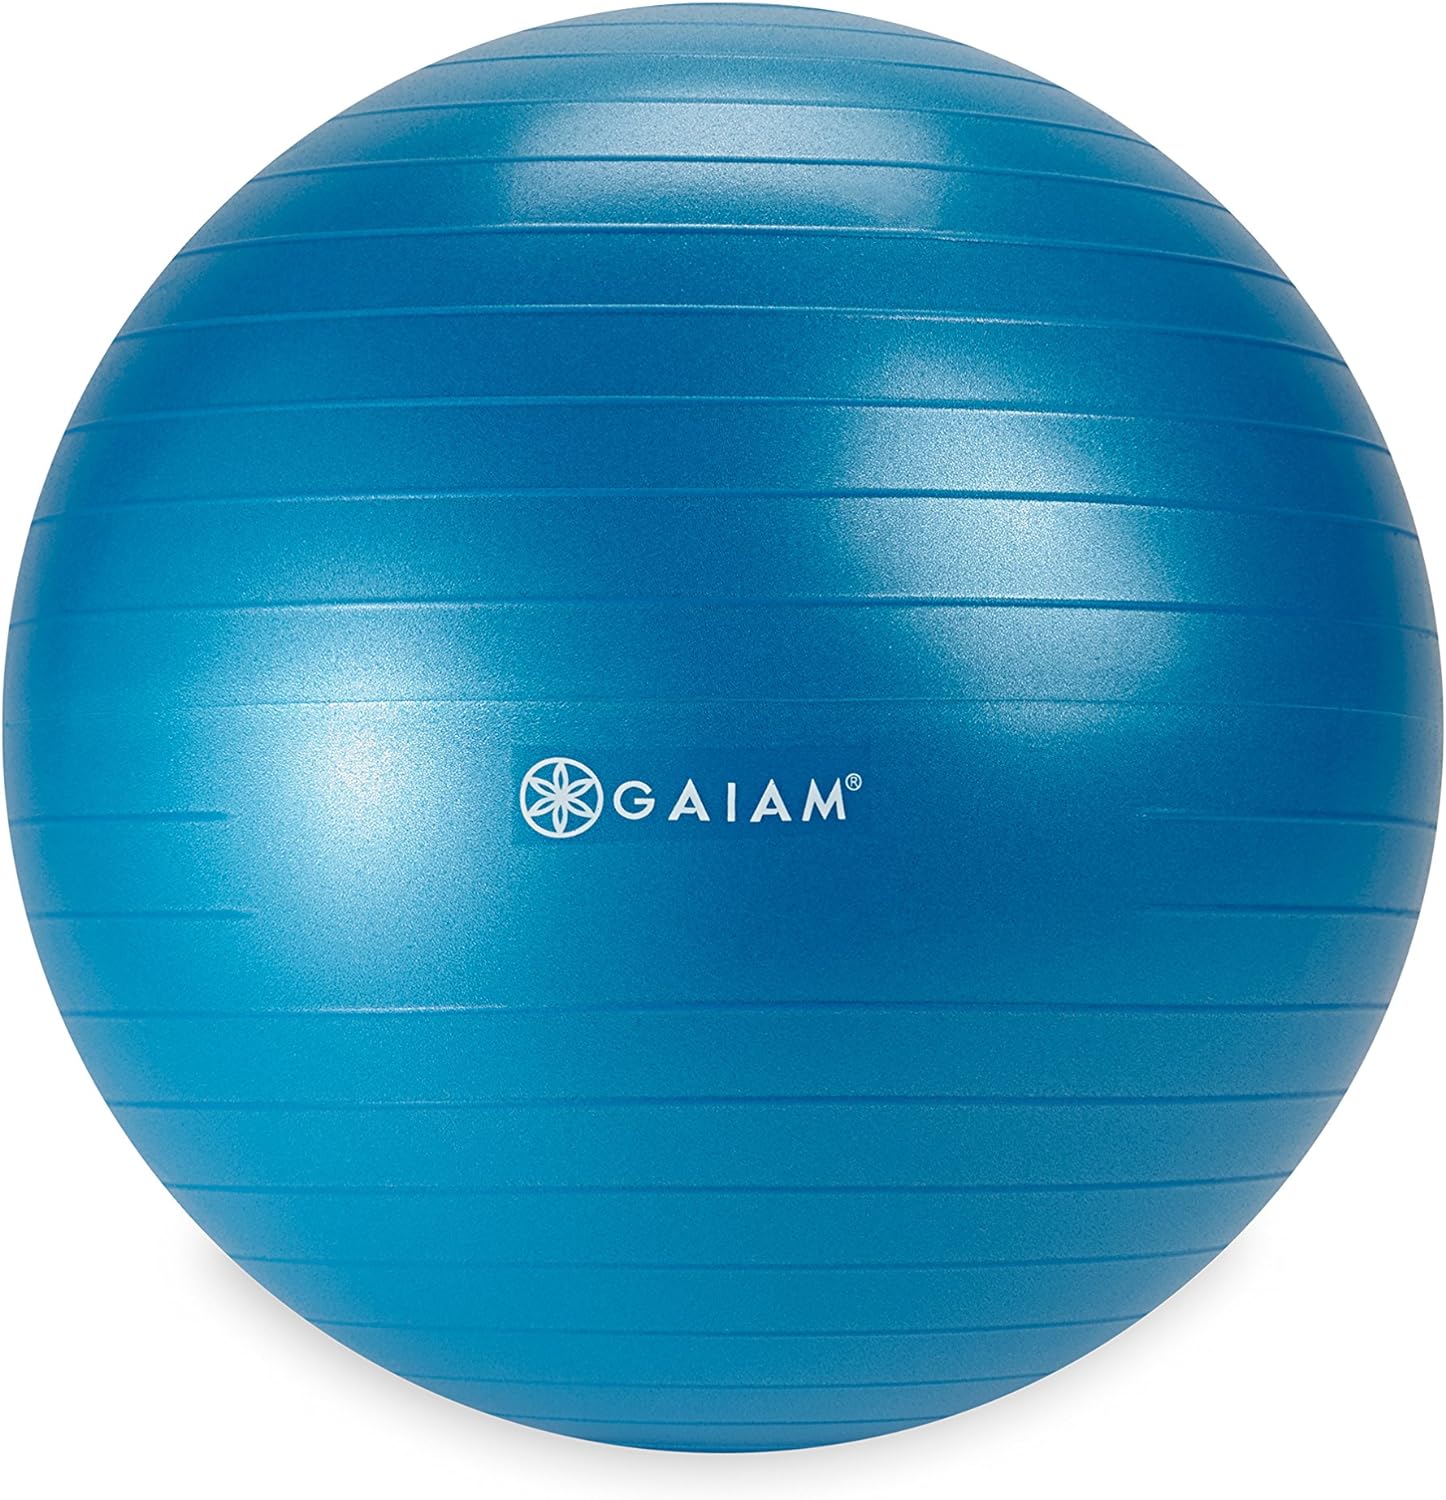 Gaiam Kids Balance Ball - Exercise Stability Yoga Ball, Kids Alternative Flexible Seating for Active Children in Home or Classroom